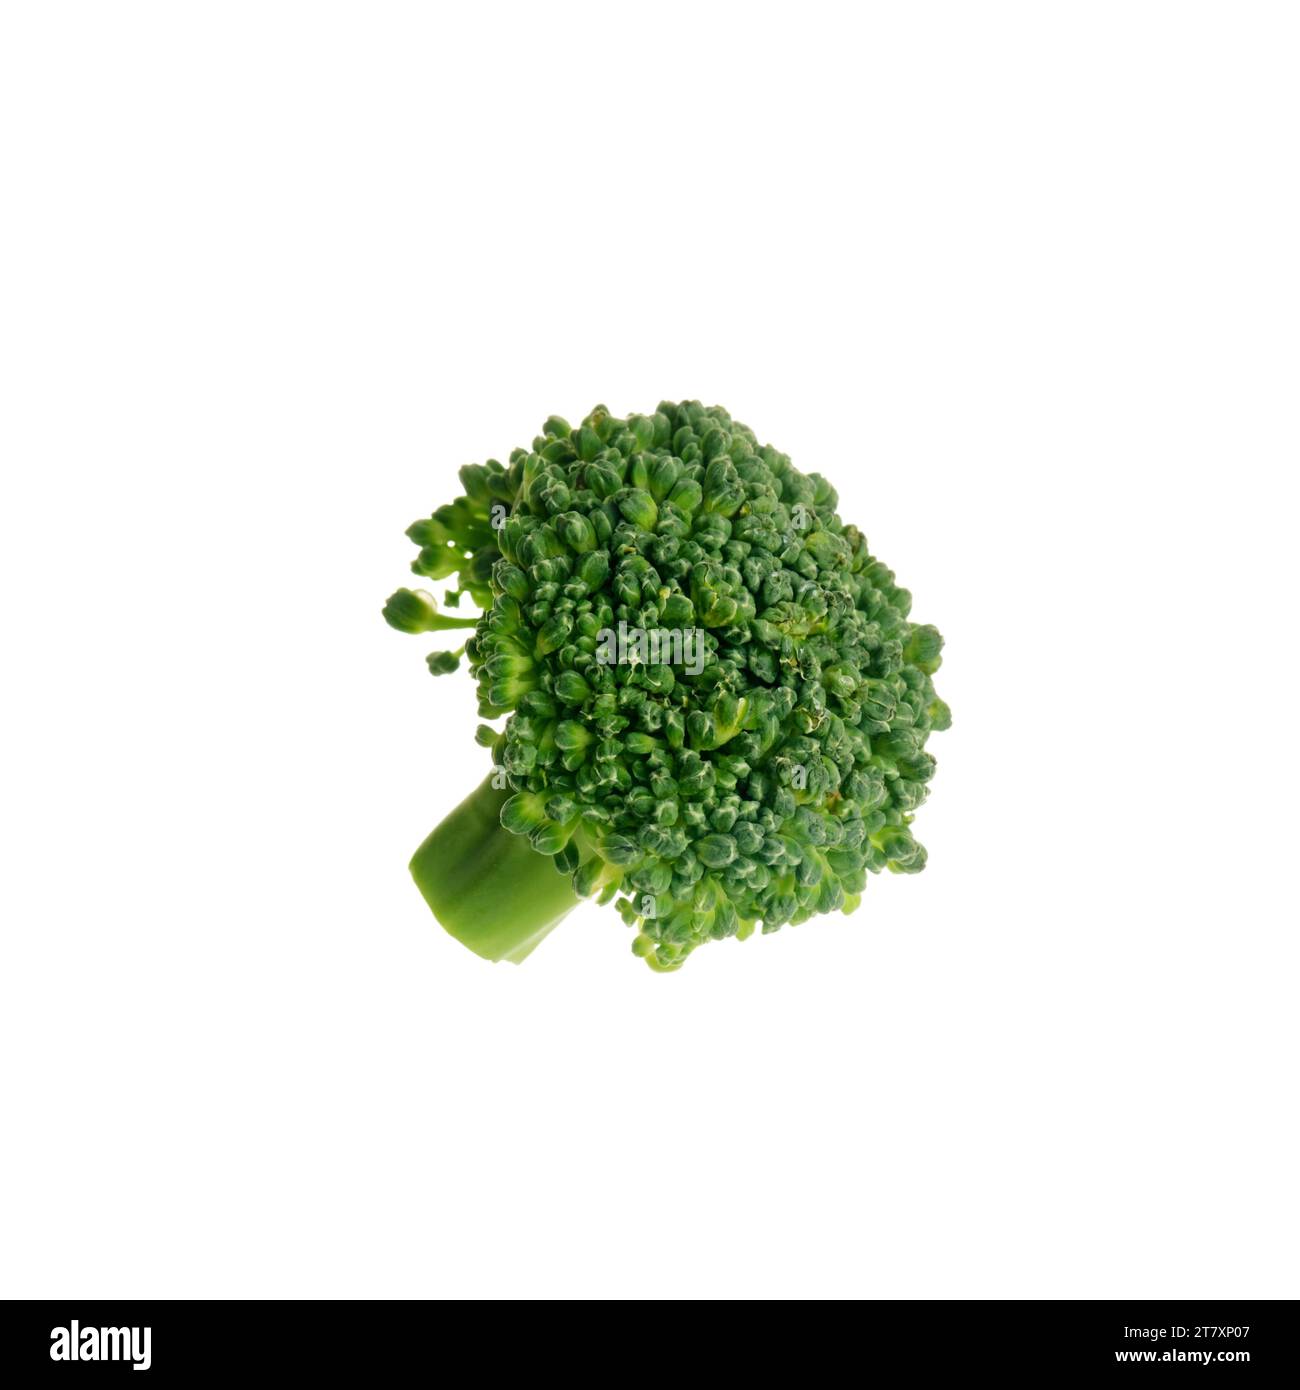 Broccoli fresh blocks for cooking isolated on white background. Square image. Stock Photo